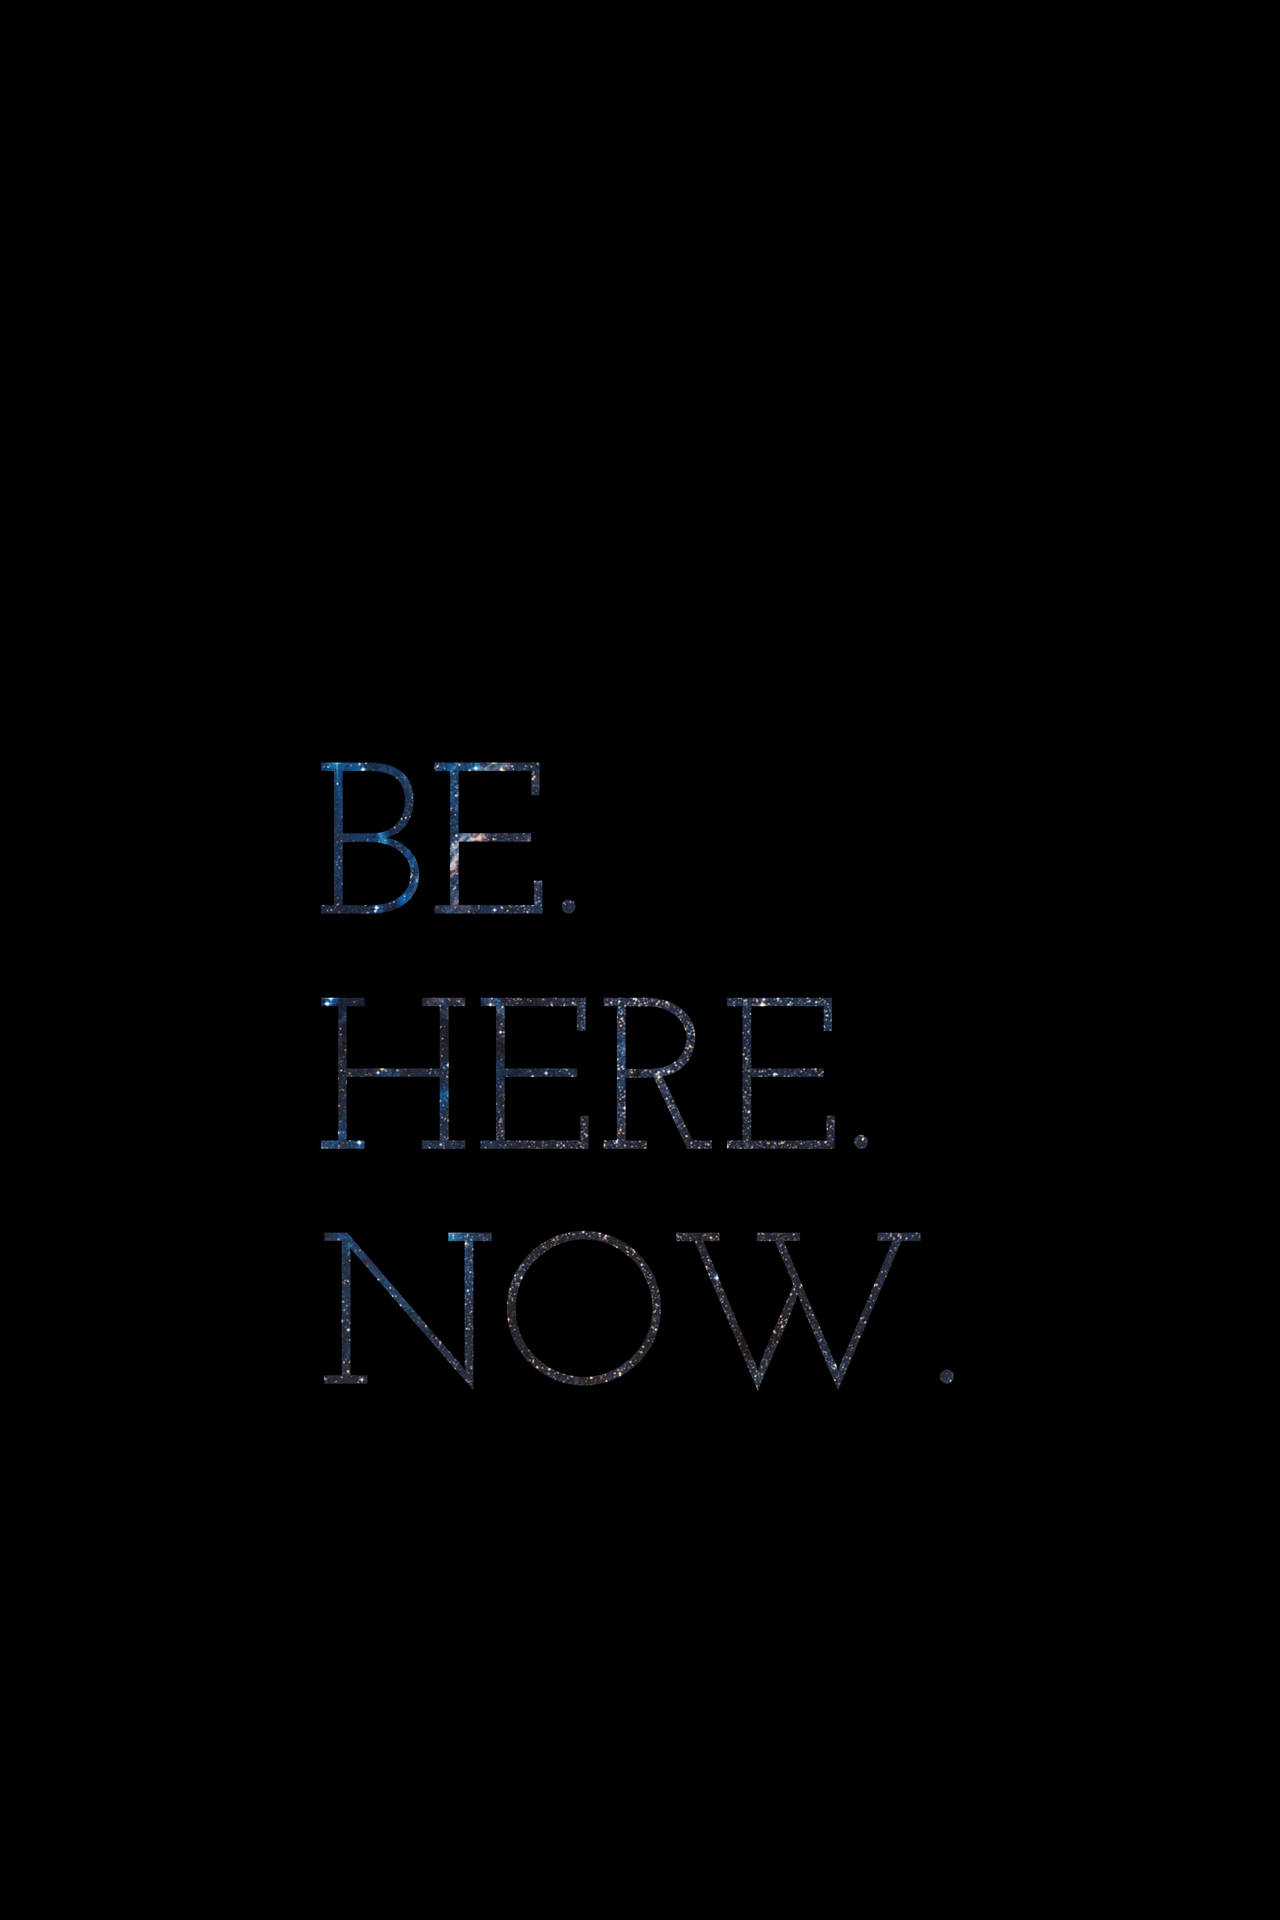 Inspirational Be Here Now Wallpaper